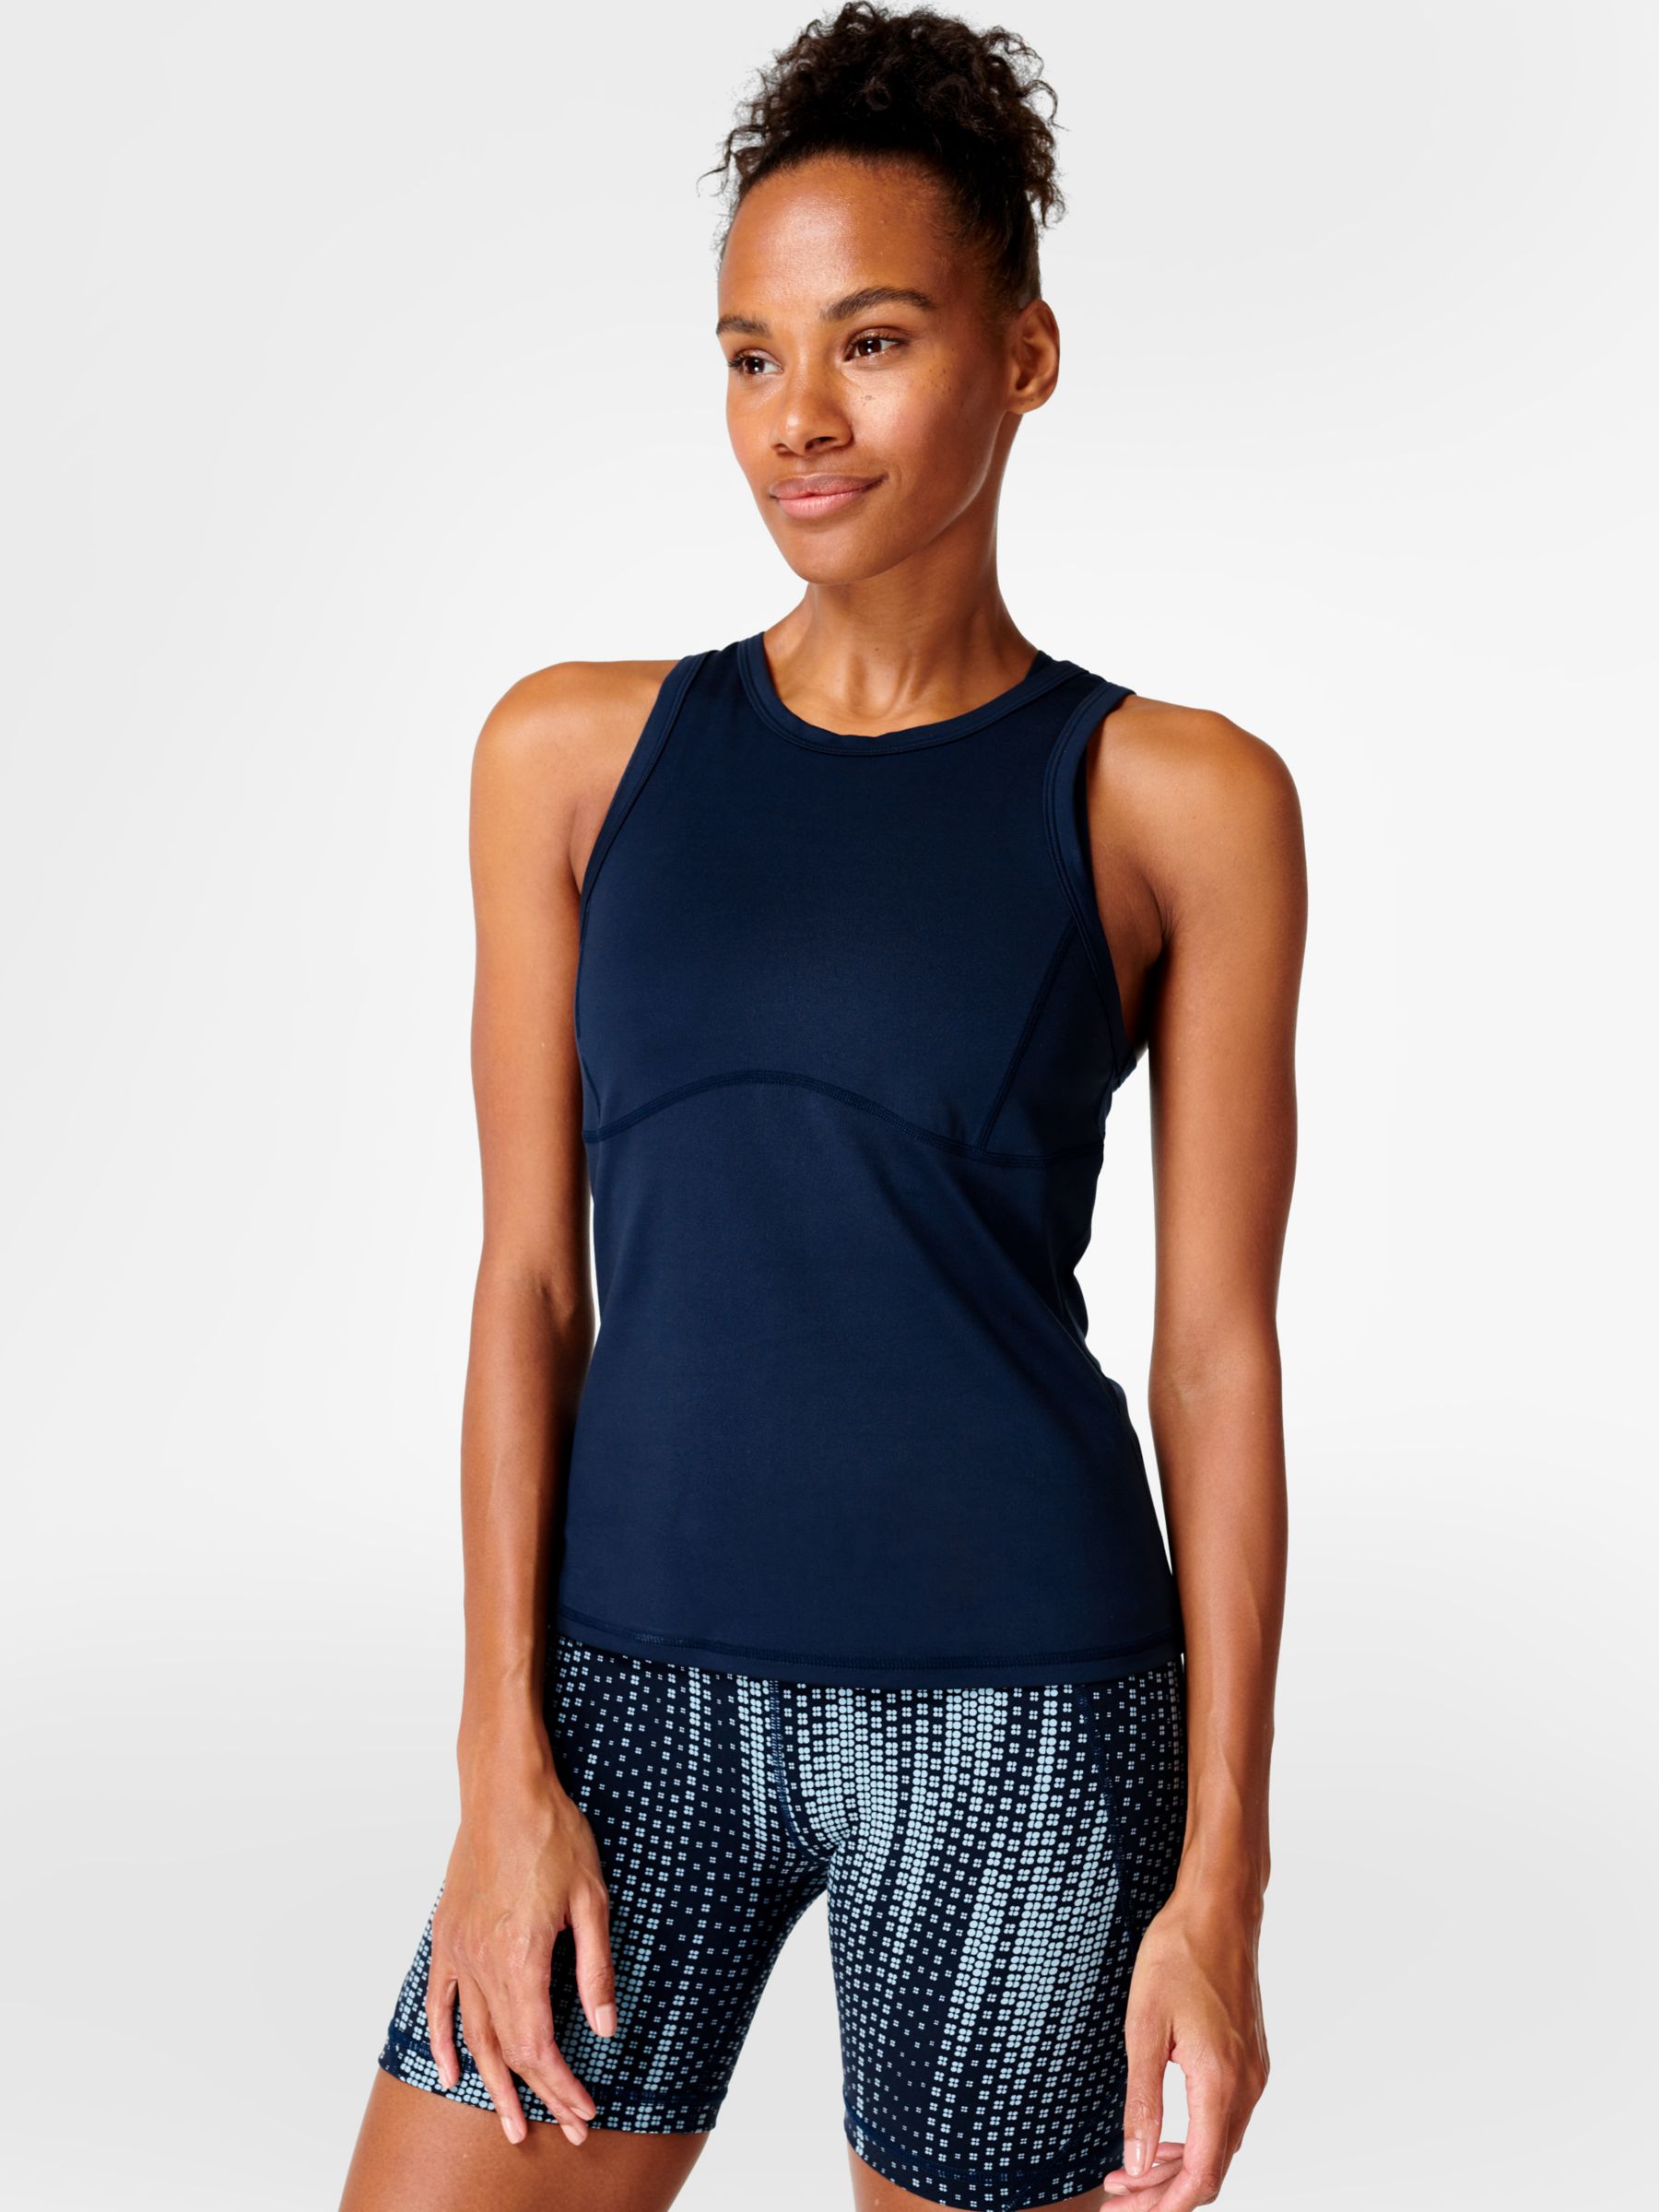 HOT* Lululemon Tanks, Tees, Shorts, and more as low as $19 shipped!